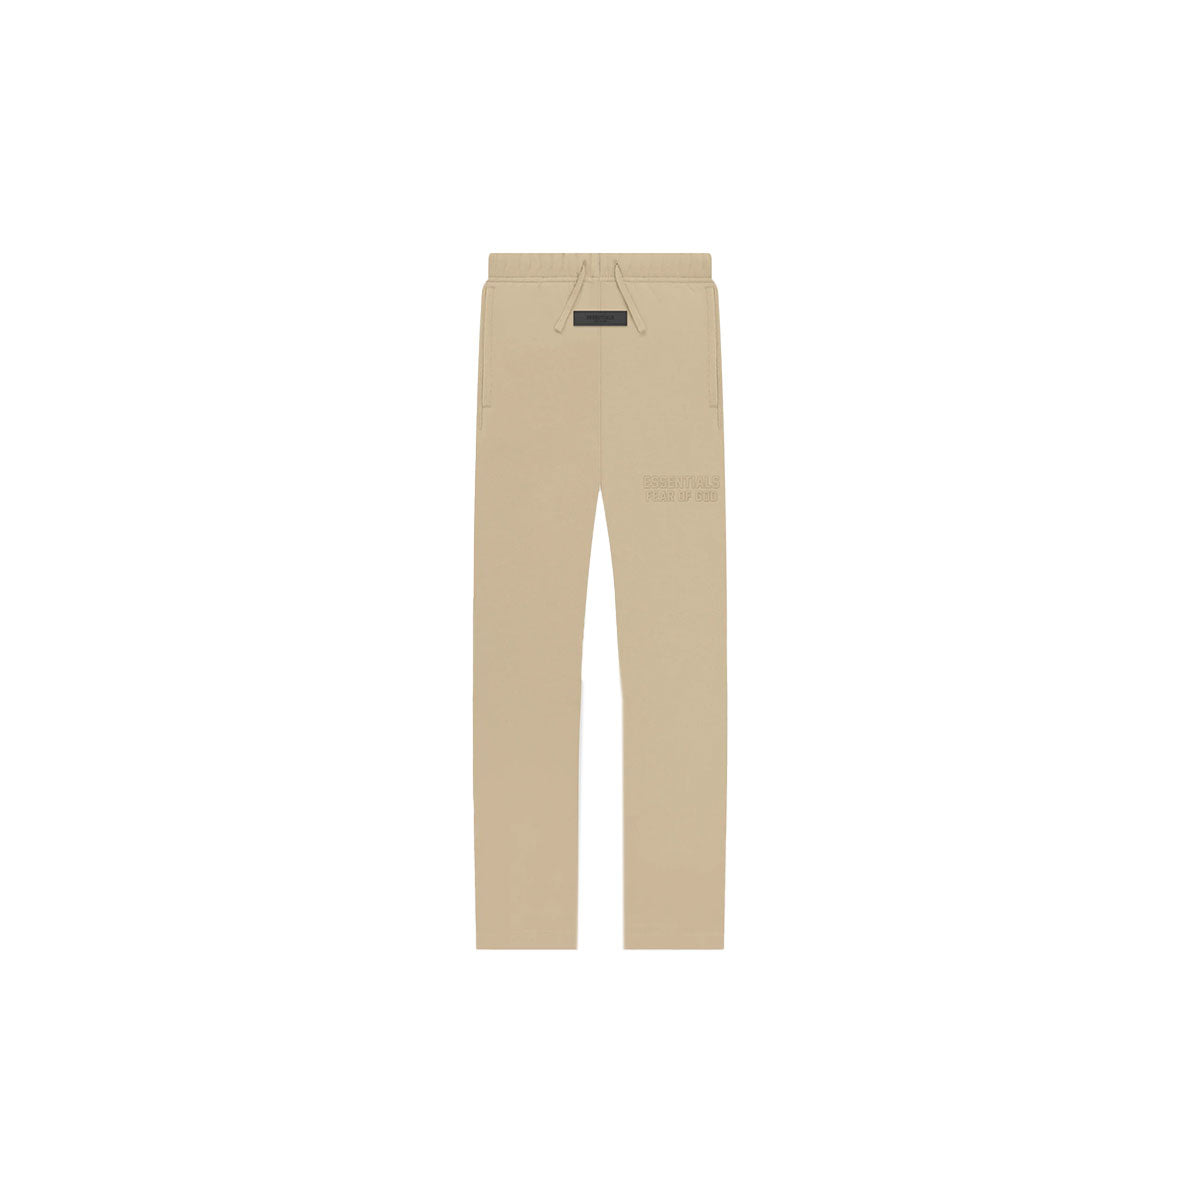 Kids Relaxed Sweatpants - Fear of God ESSENTIALS